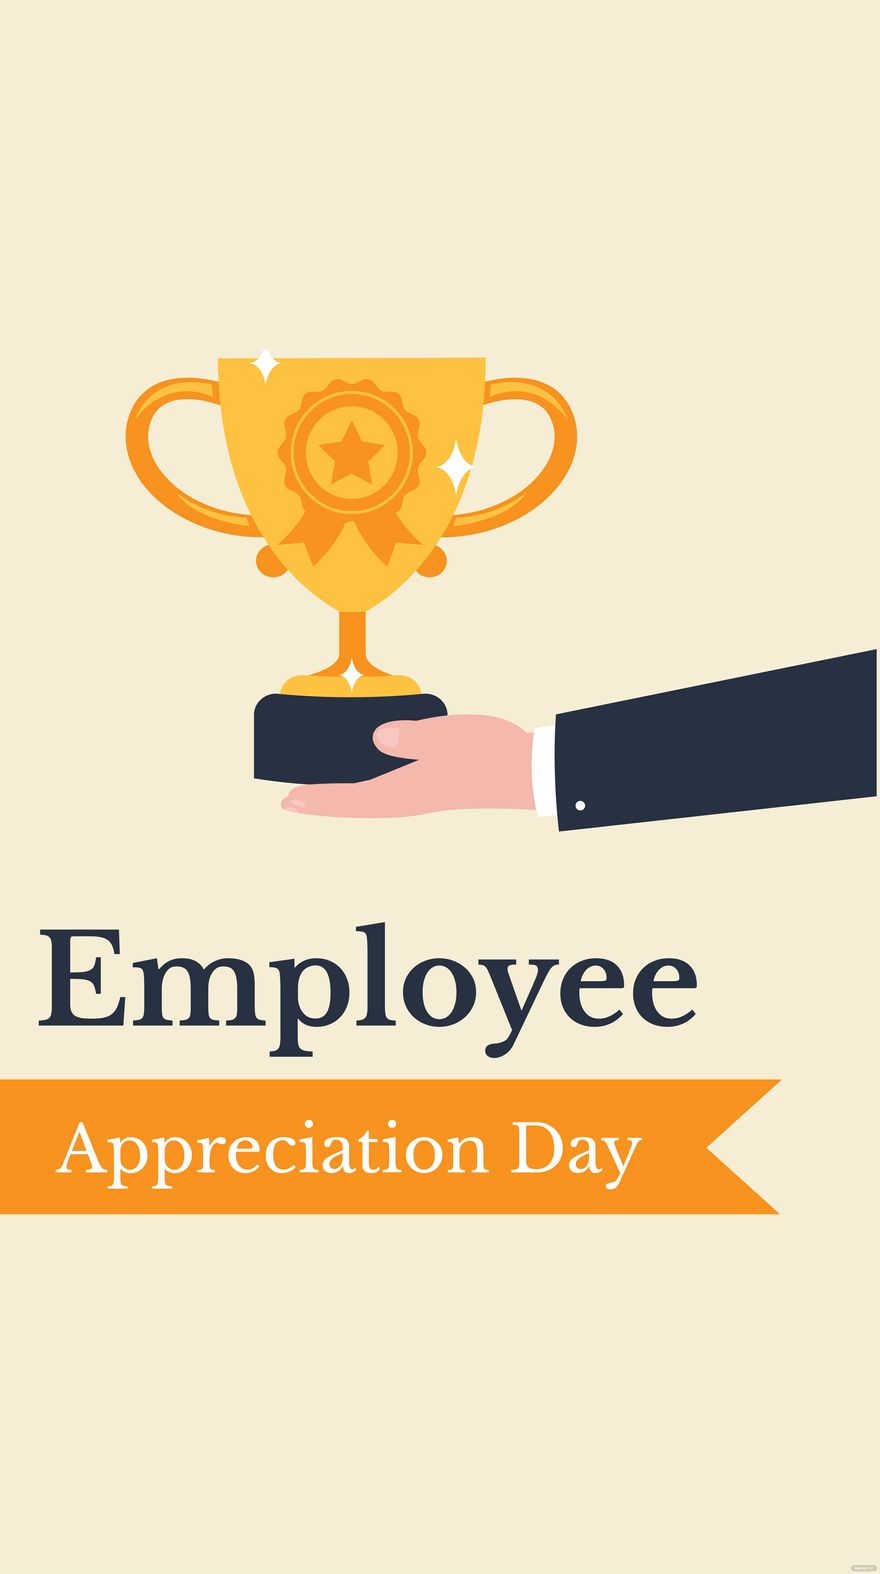 Free Employee Appreciation Day iPhone Background in PDF, Illustrator, PSD, EPS, SVG, JPG, PNG